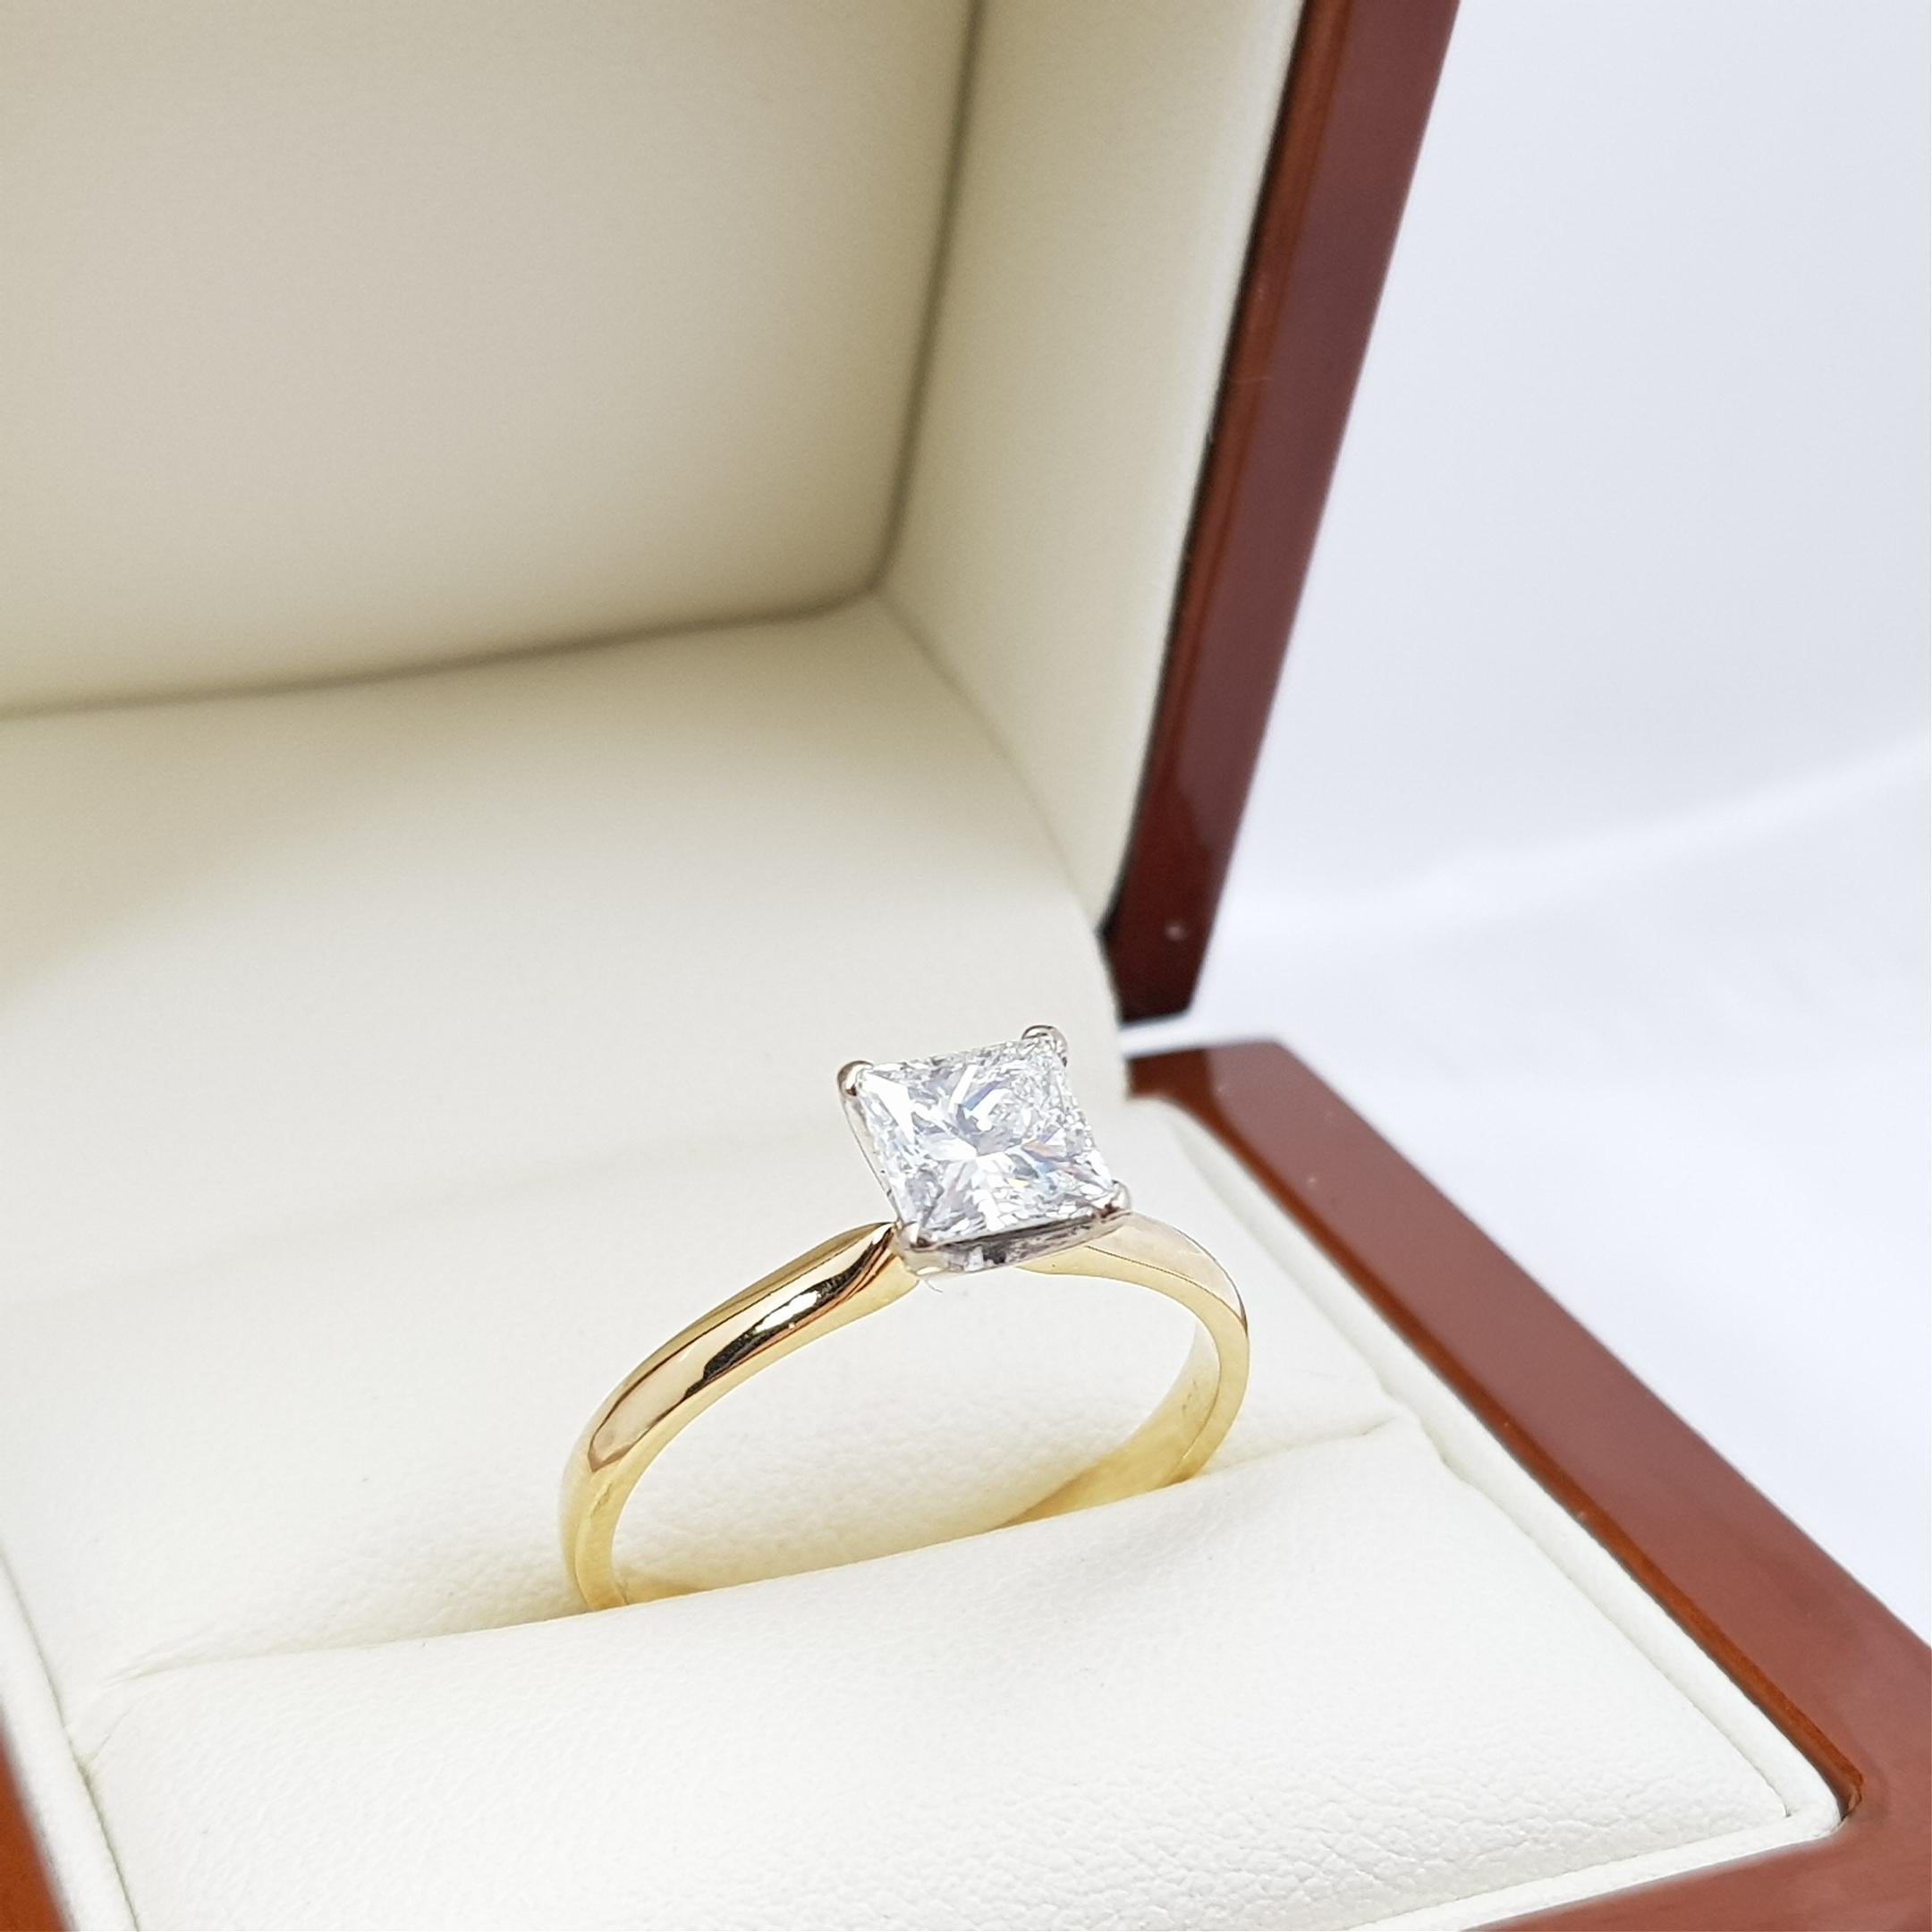 18ct Gold 1.23ct Princess Cut Solitaire Diamond Ring GIA Certified For Sale 6